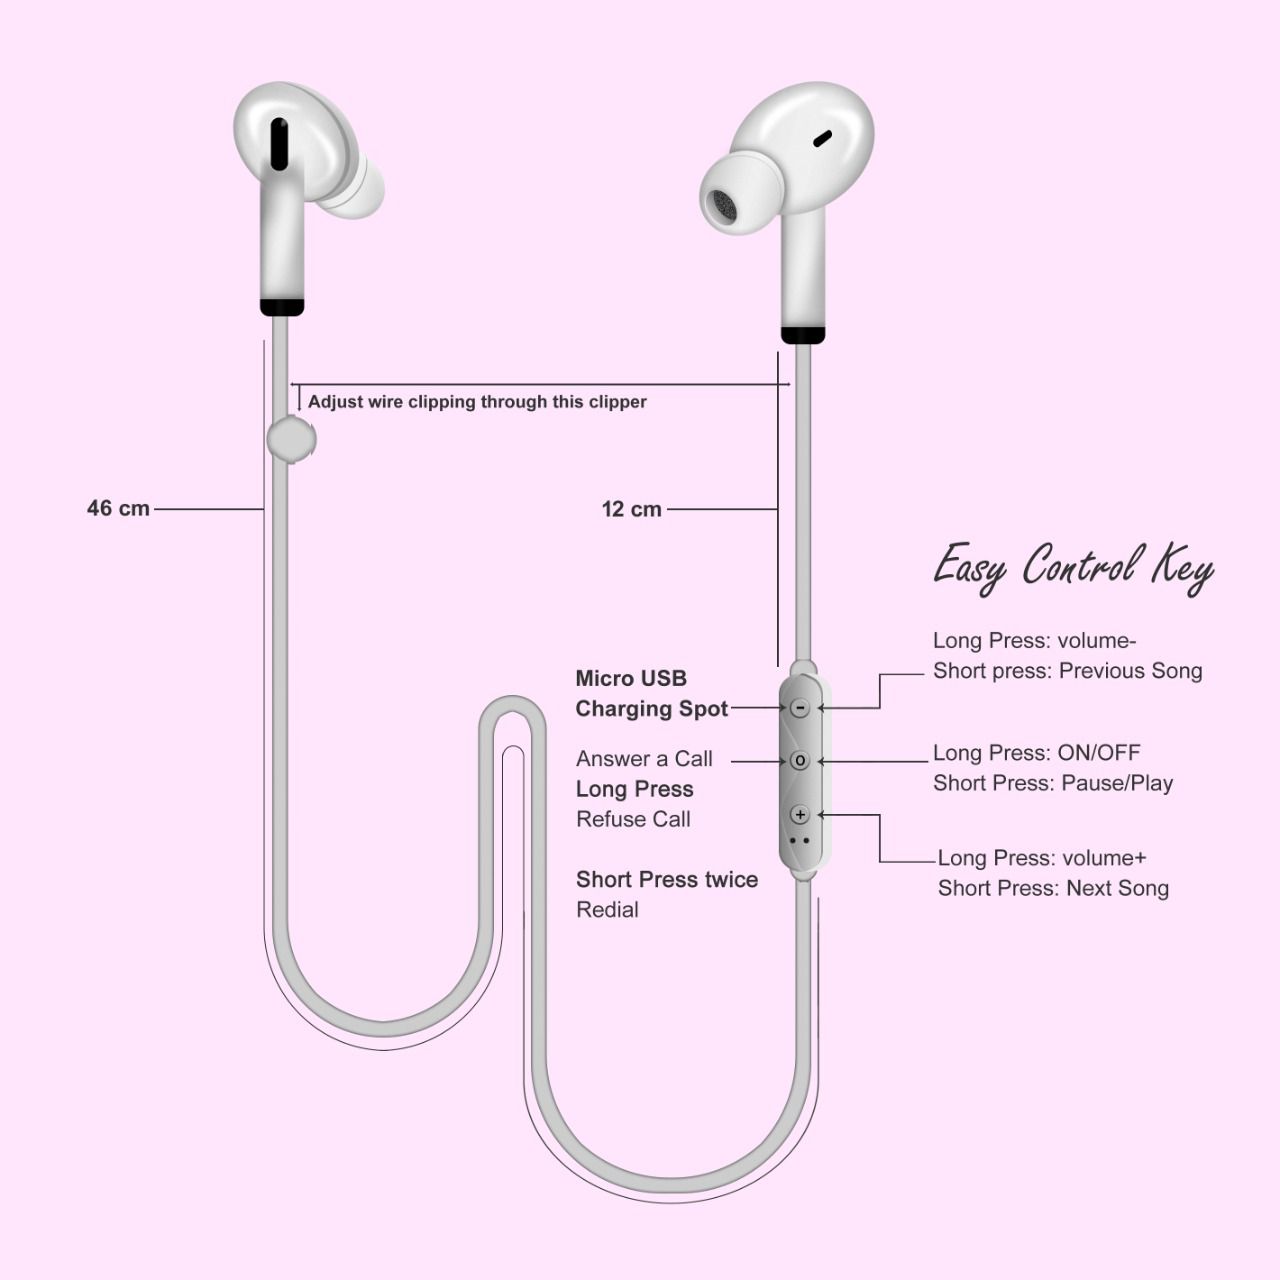 VIPPO MBT 154  Hitage Galaxy Touch HIGH QUALITY MAGNET EARPHONE Neckband Wireless Earphones With Mic